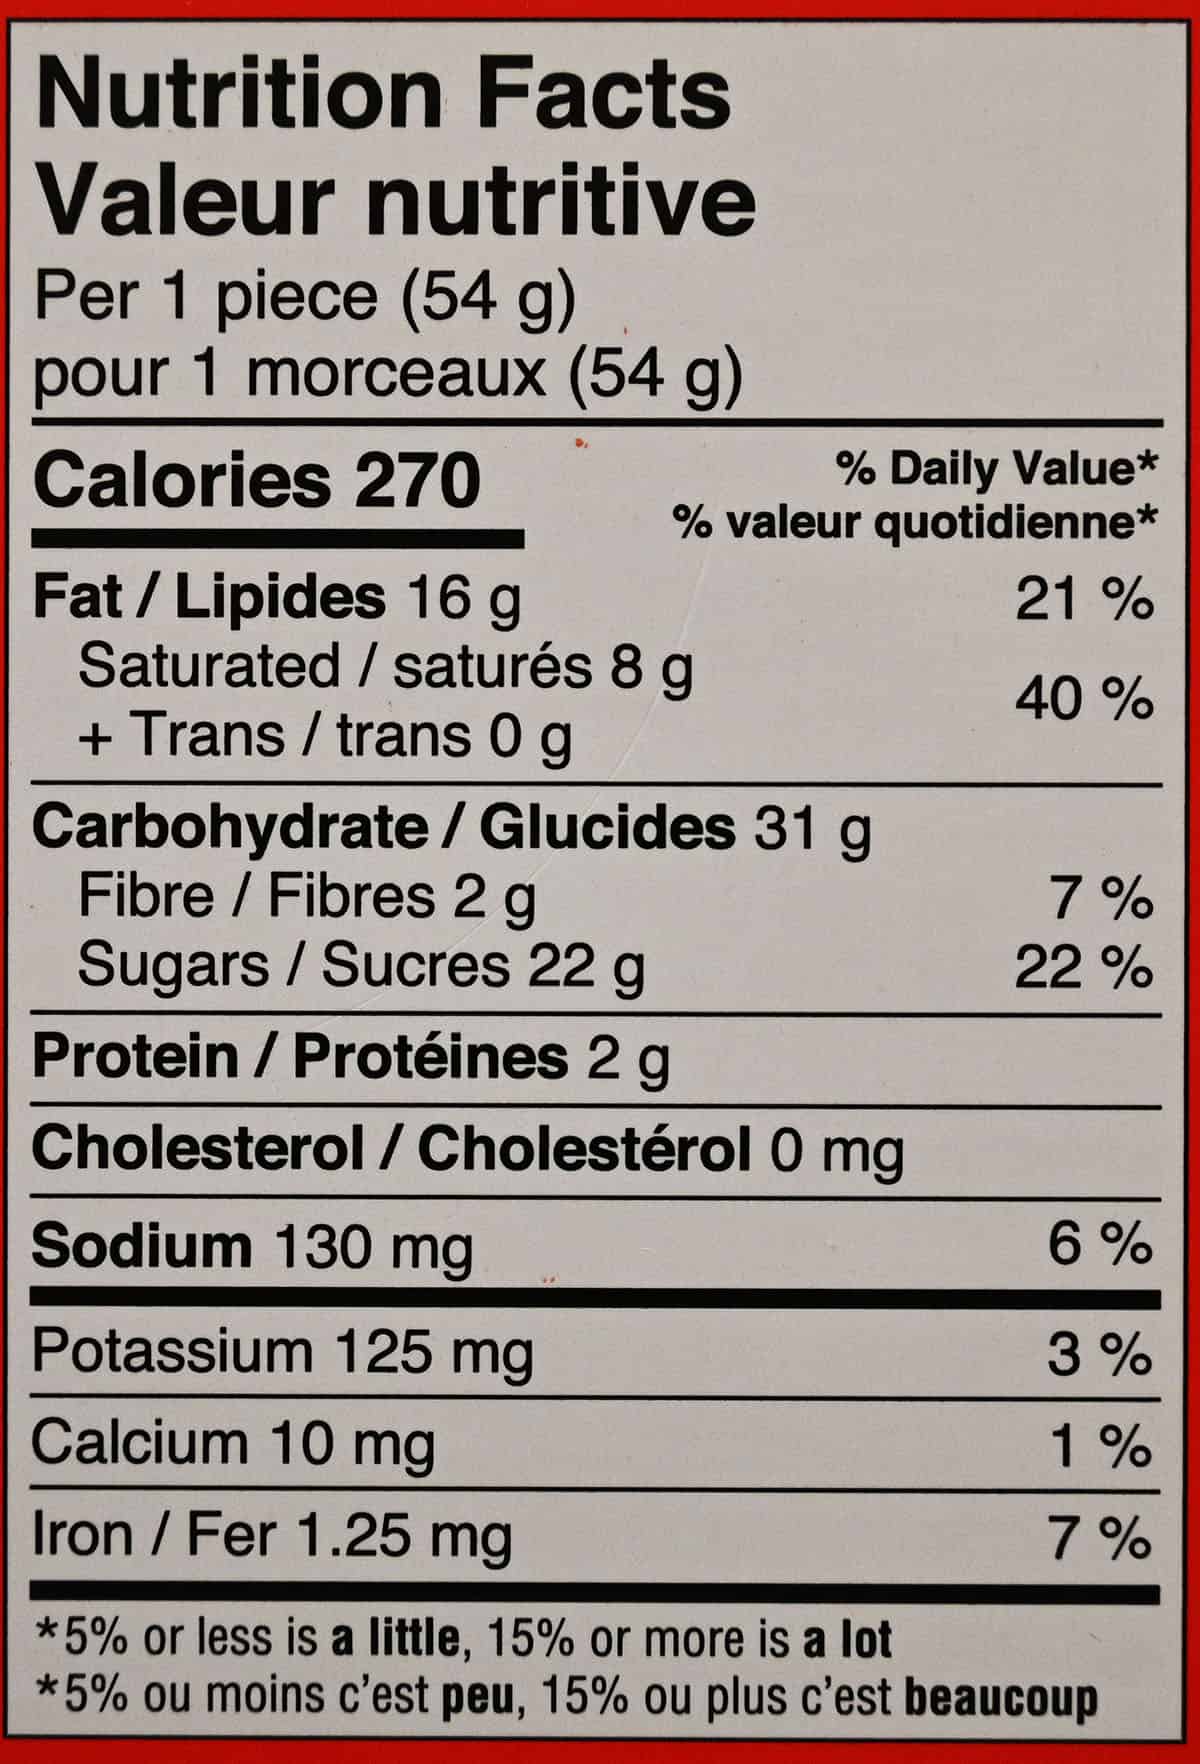 Image of the Nanaimo bar nutrition facts from the box.